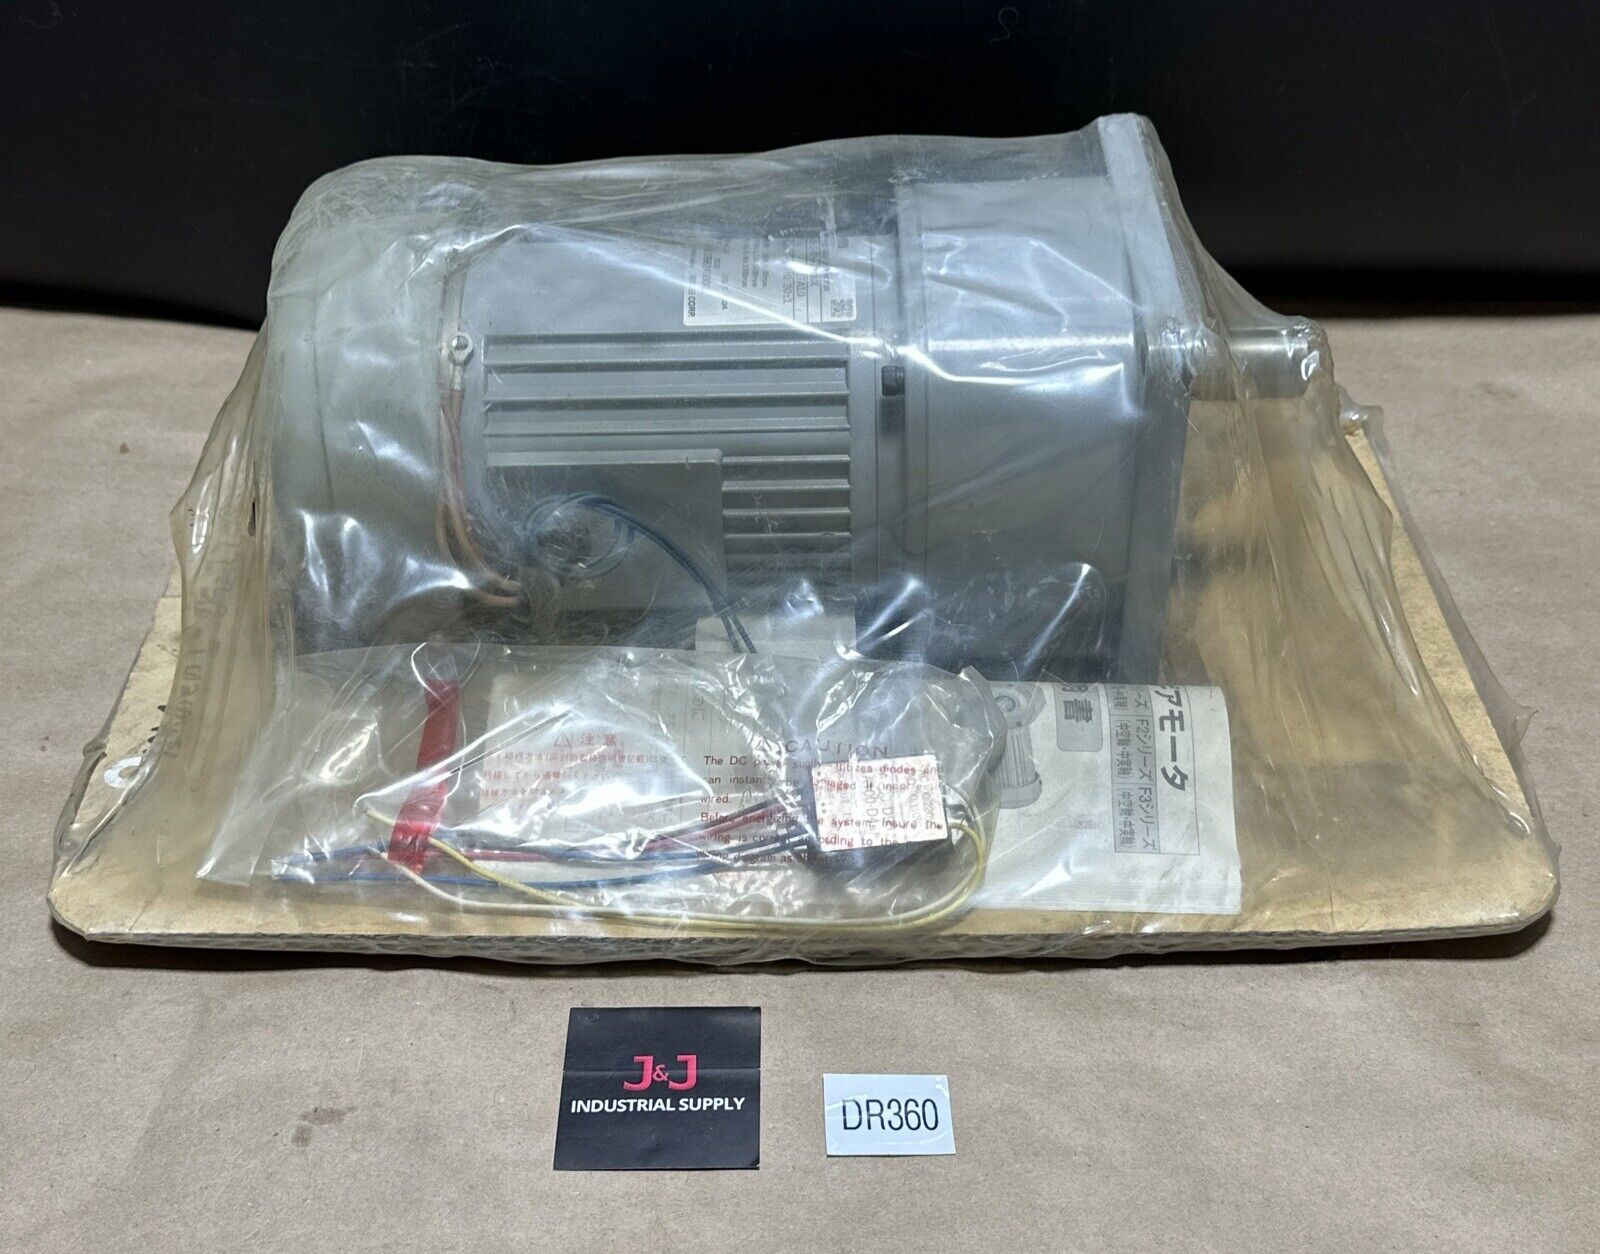 NEW - Nissei Corp GTR 3~Phase Induction Motor G3KB-22-30-T020WX 30:1 480V 🇺🇸